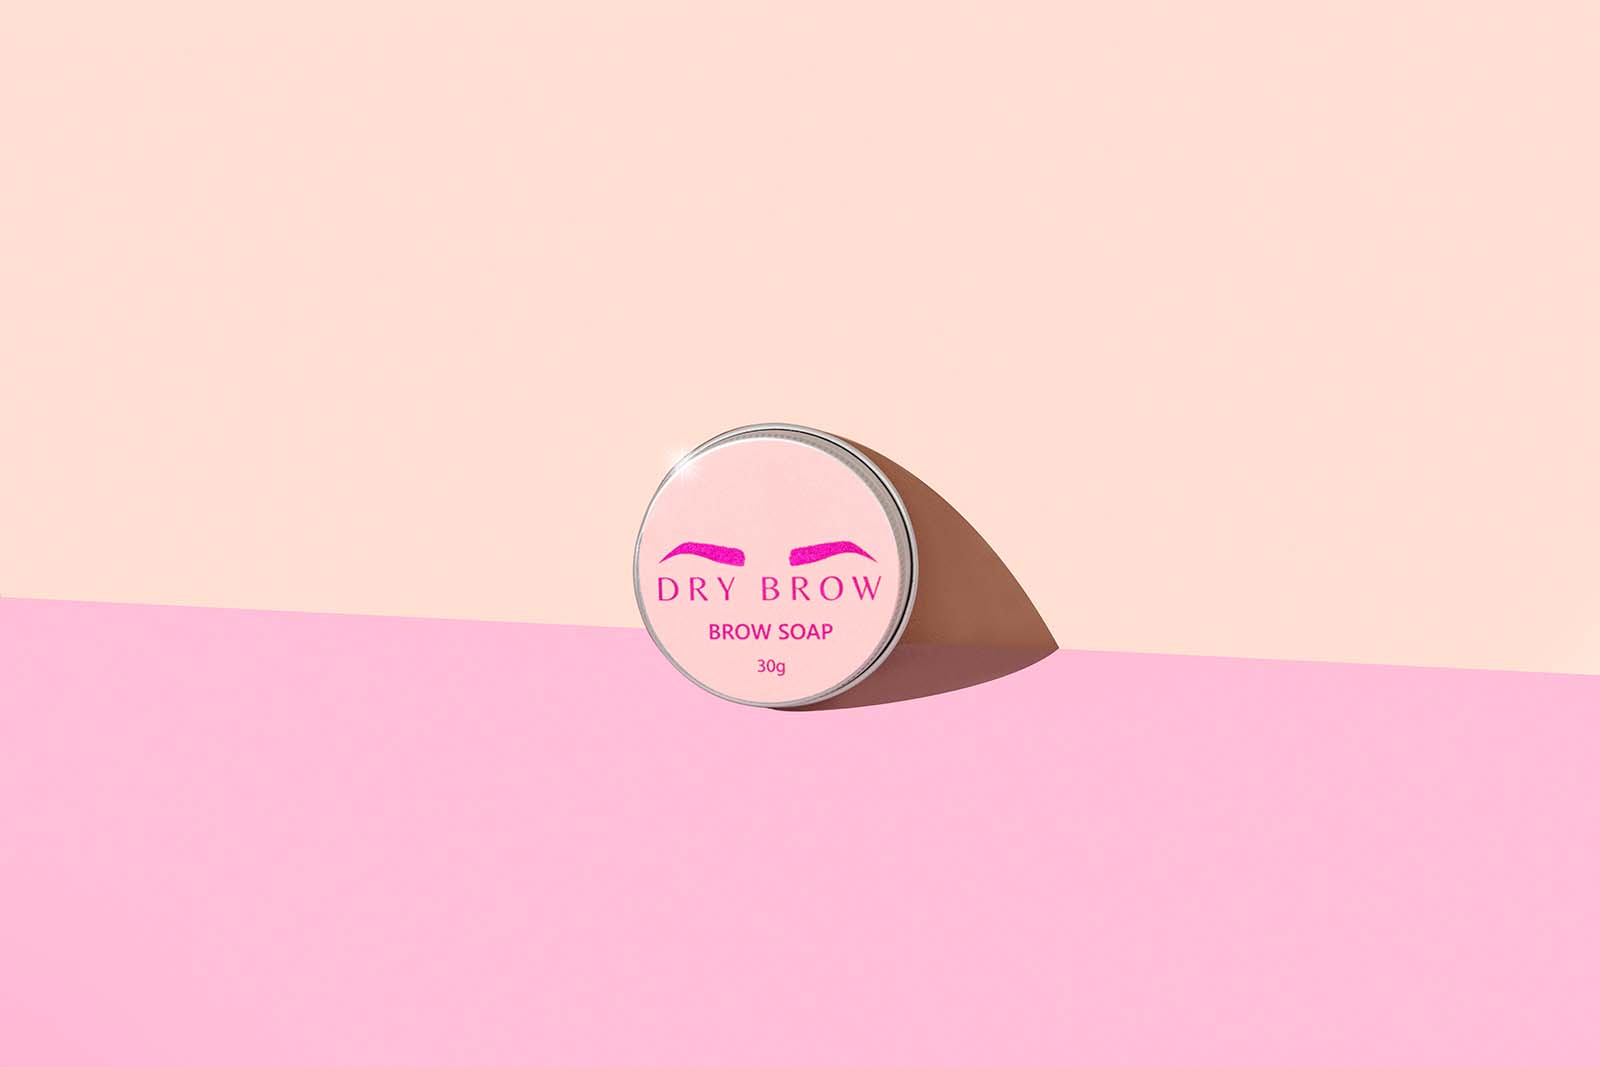 PInk and Orange Proudct photos for skincare brand dry brow. Pink aesthetic image styled by product photographer colourpop studio